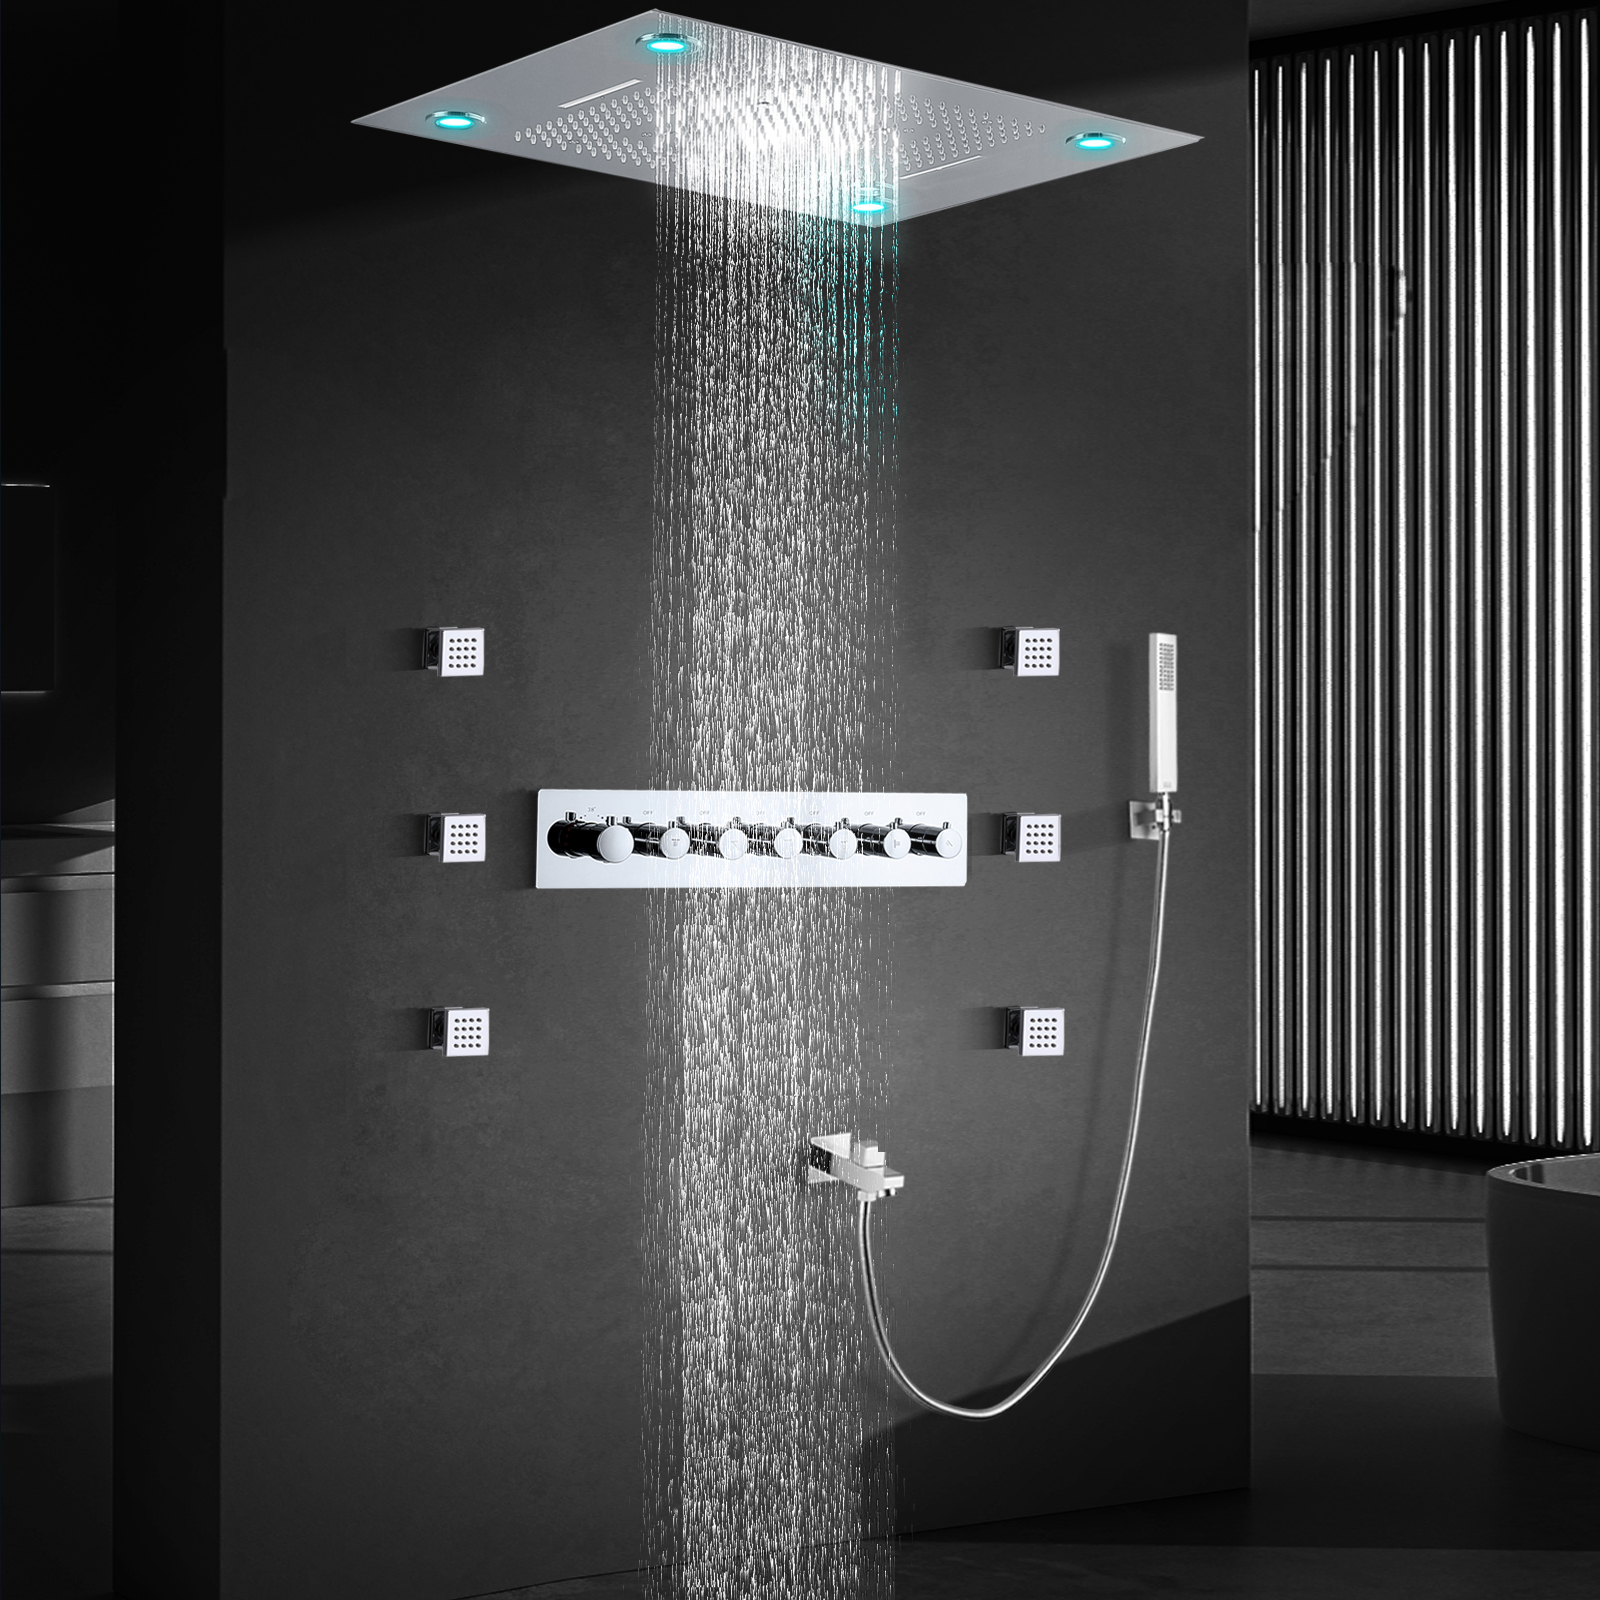 Ceiling Mounted Music Led Shower System 32*24 Inch Mist Rain & Waterfall Shower Head Bathroom Thermostatic Shower Mixer Set